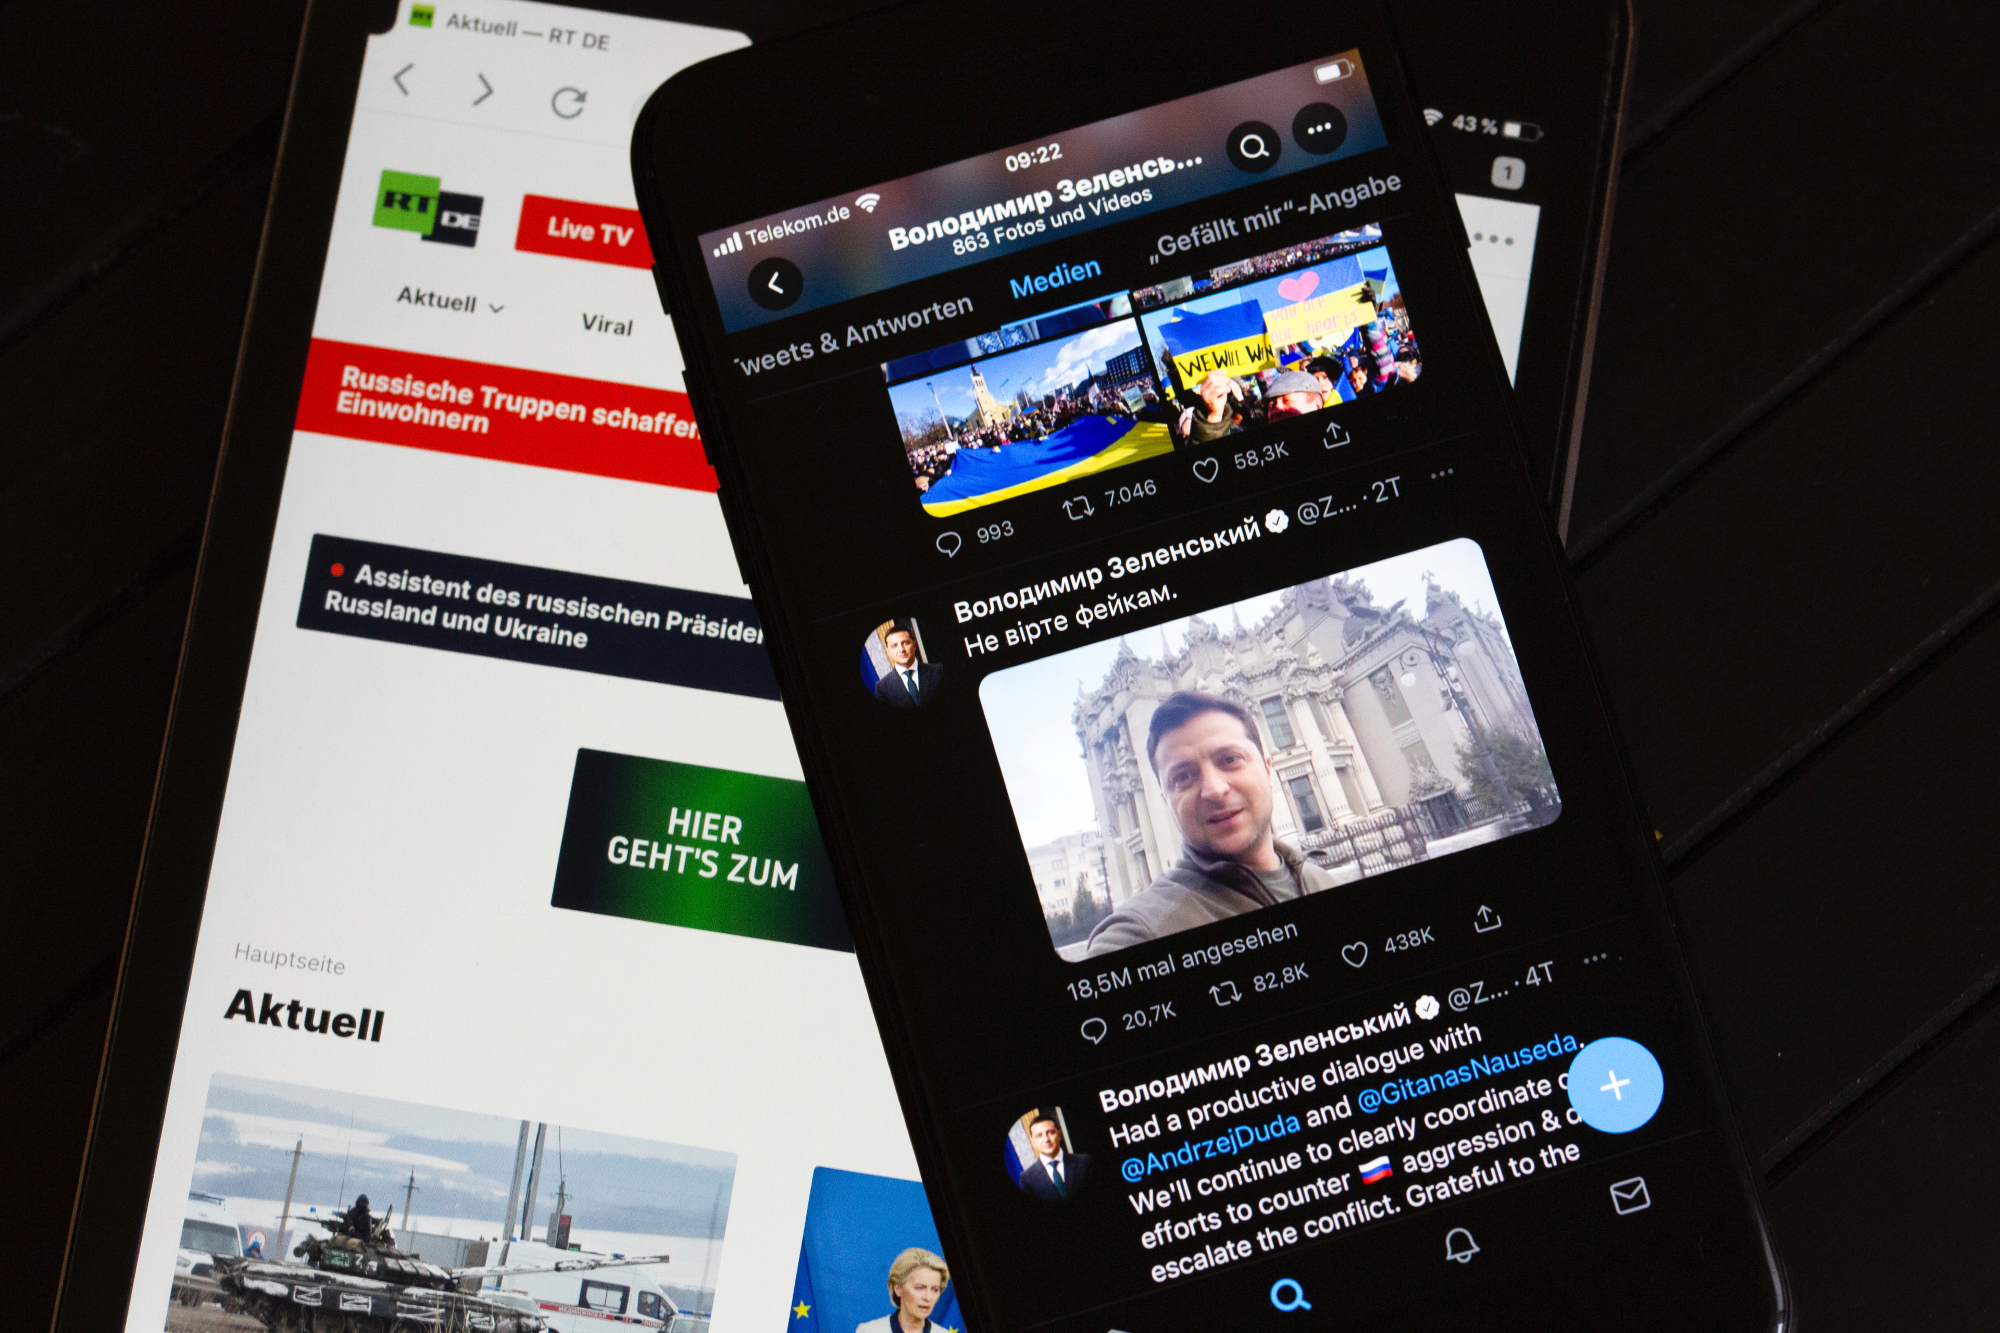 On the screen of a tablet (l), the website of the Russian TV channel RT can be seen. On the right, the screen of a smartphone shows the official Twitter account of Ukrainian President Selenskyj